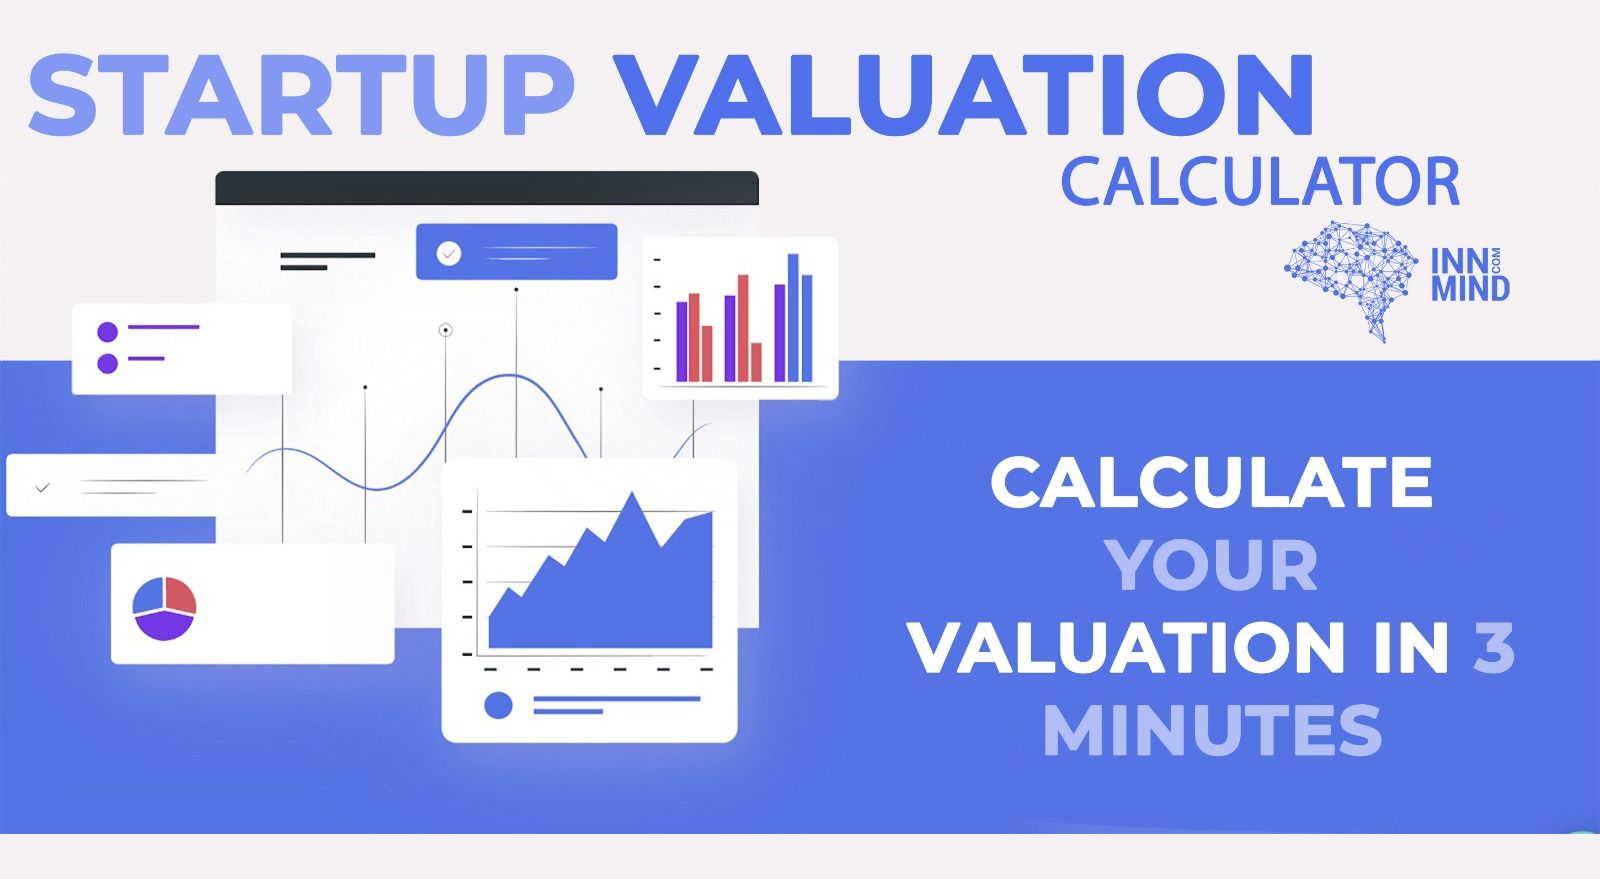 Startup Valuation Calculator by InnMind